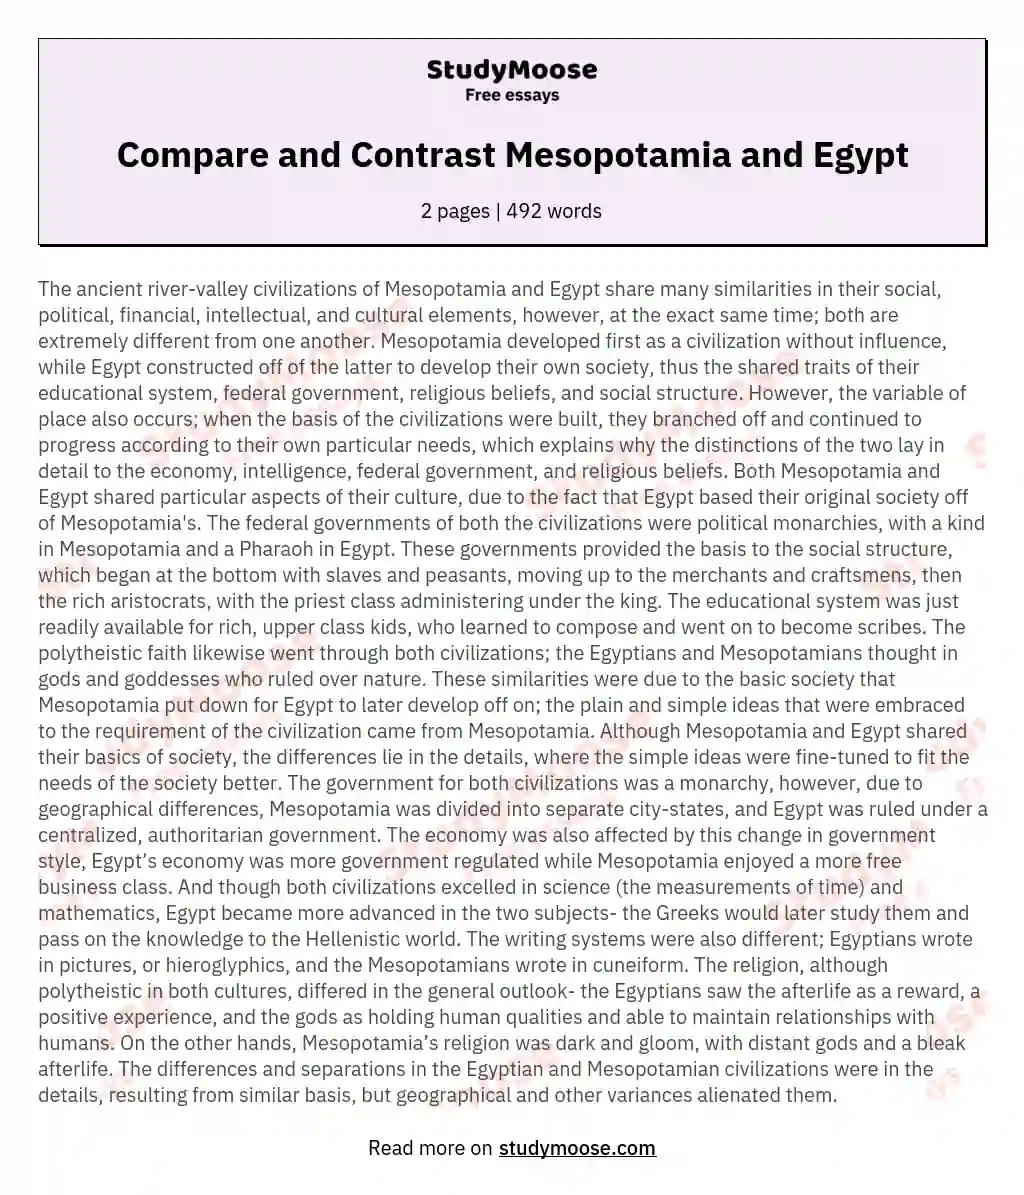 Compare and Contrast Mesopotamia and Egypt essay